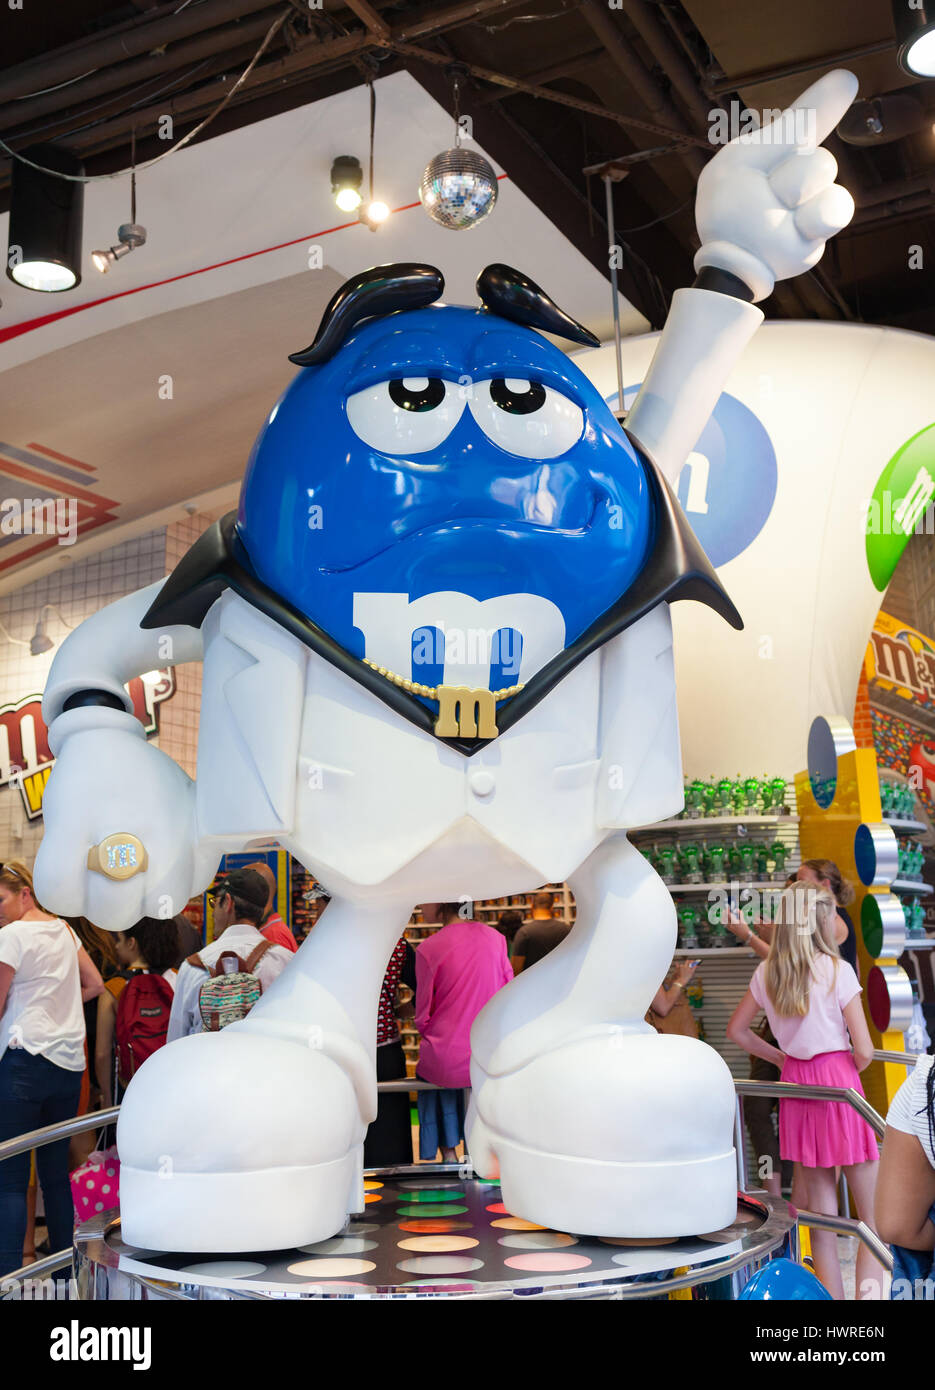 New York City, Usa - July 08, 2015: The M&M world store in Times square. M&M's strikes a pose a la John Travolta's character in the movie Saturday Nig Stock Photo